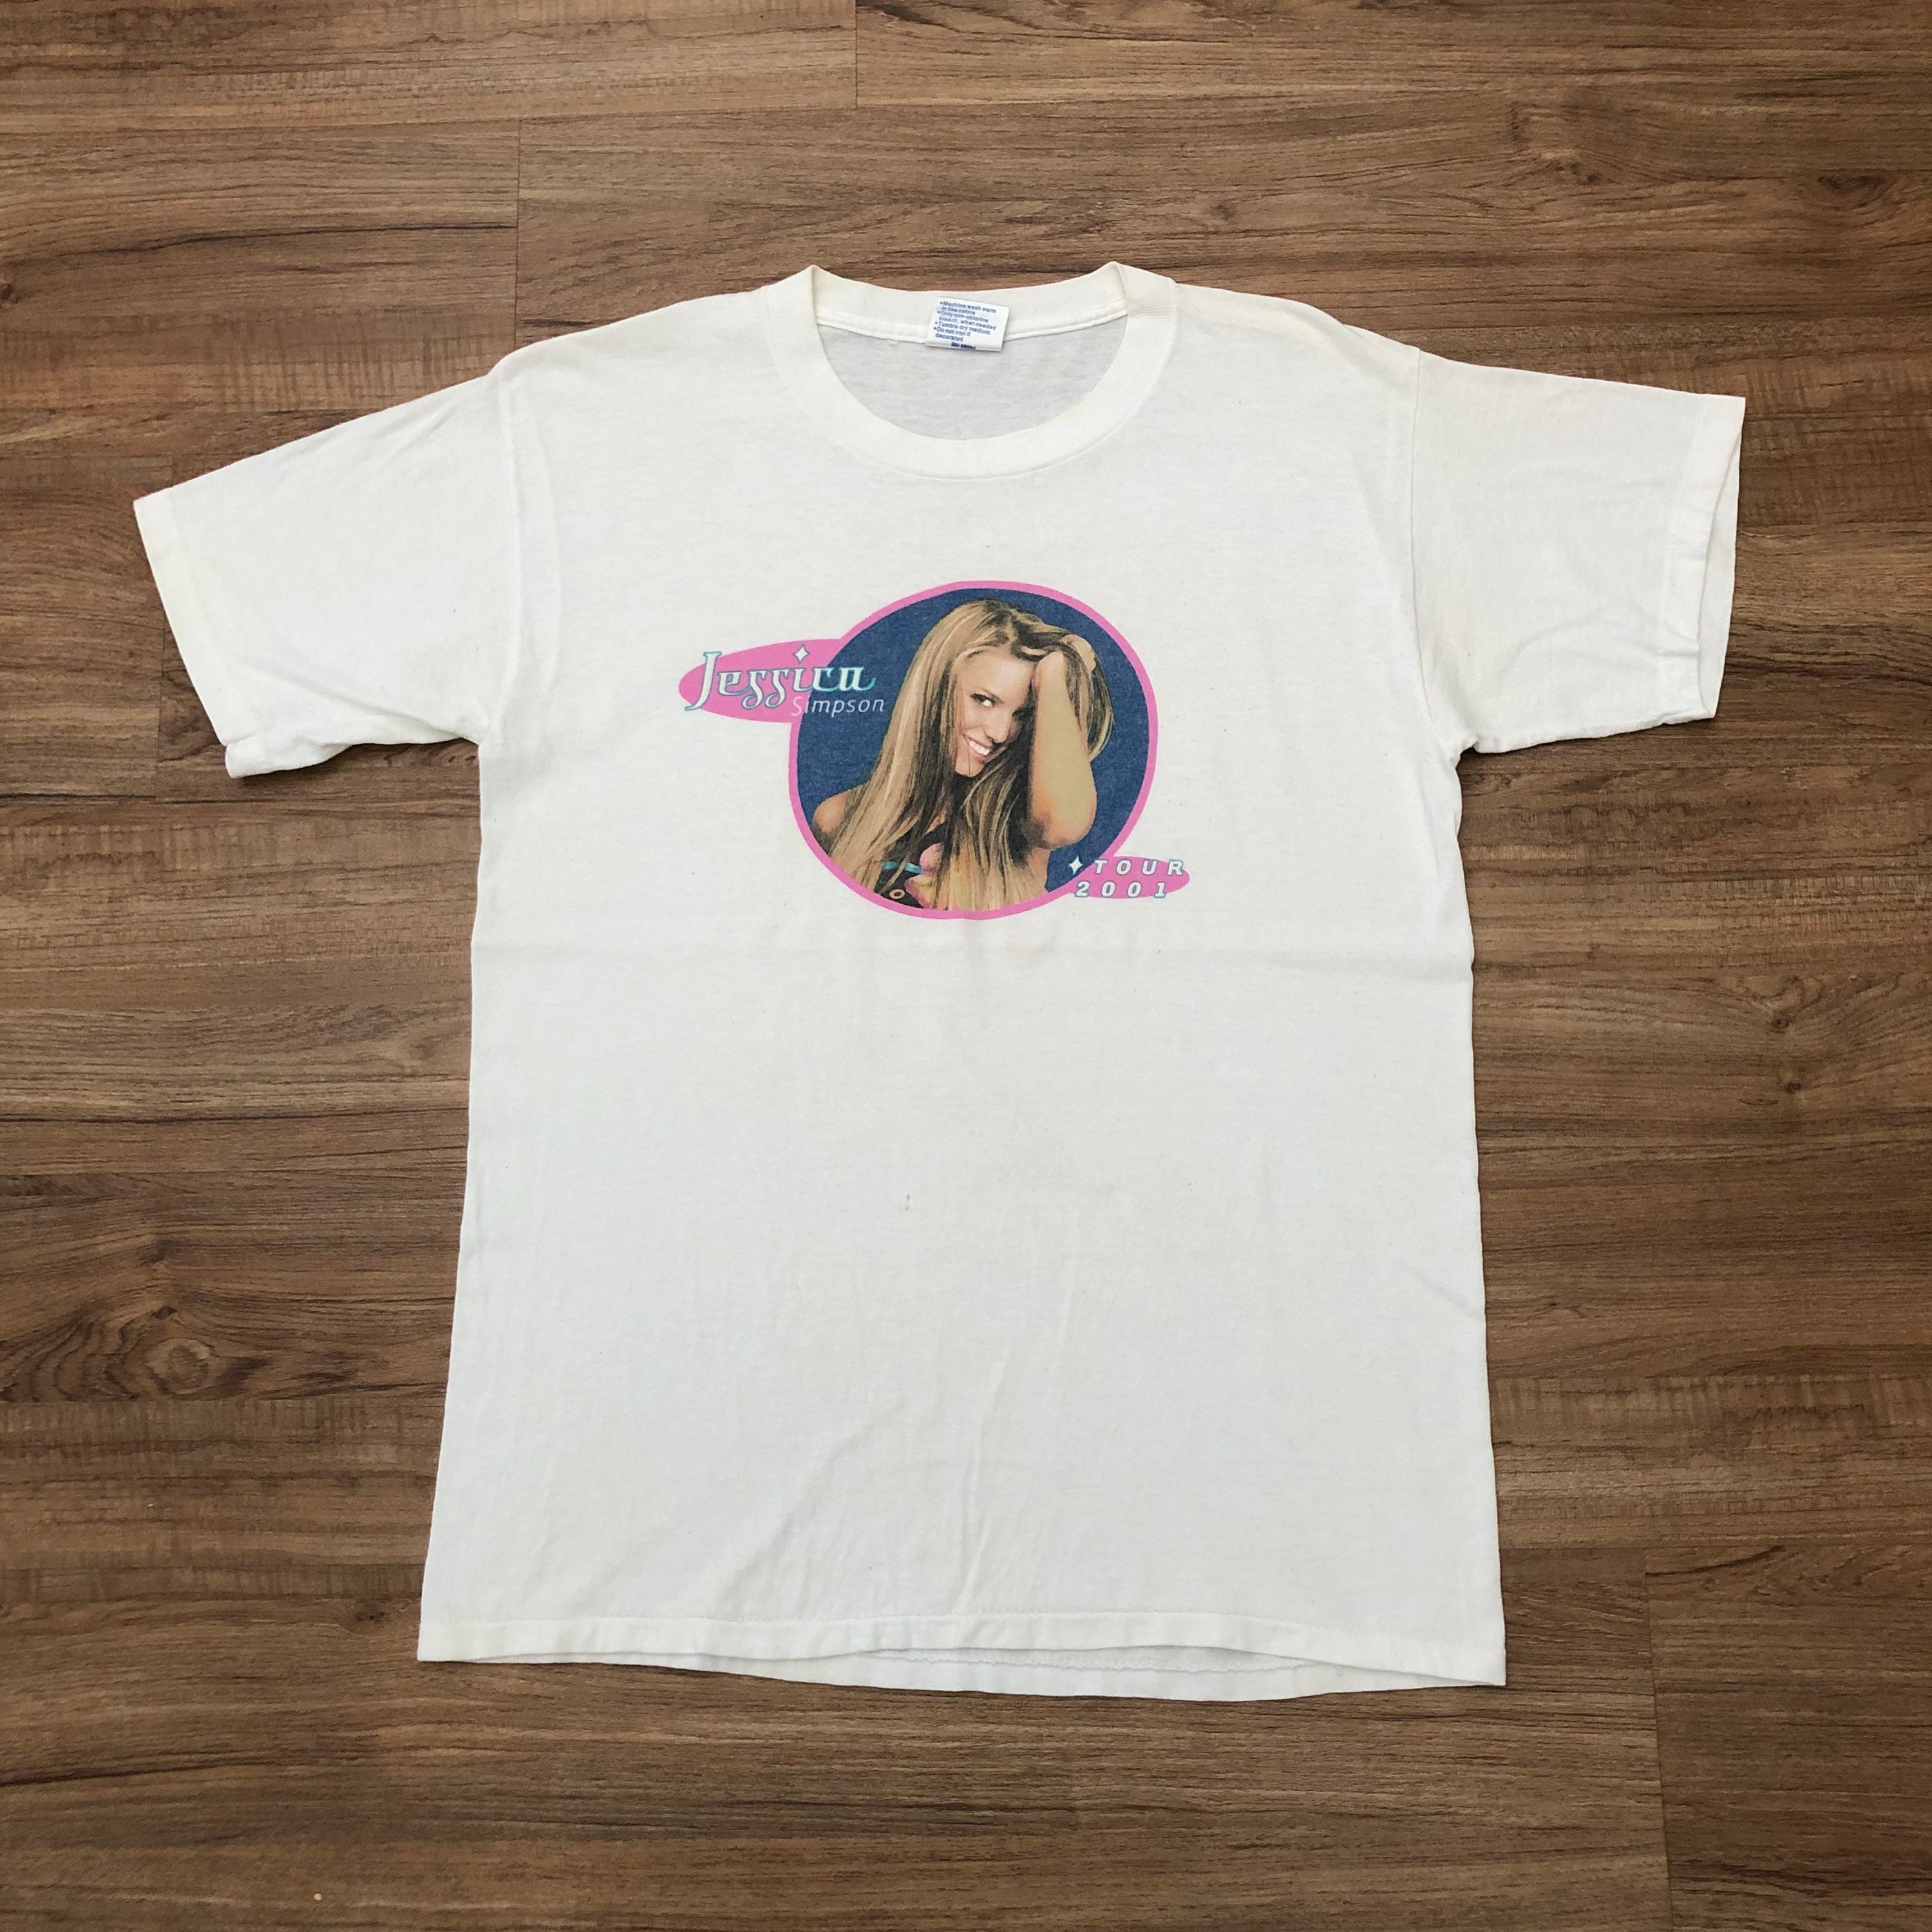 Yth L or Adult S Shirt Vintage JESSICA SIMPSON Dreamchaser World 2001 Tour T